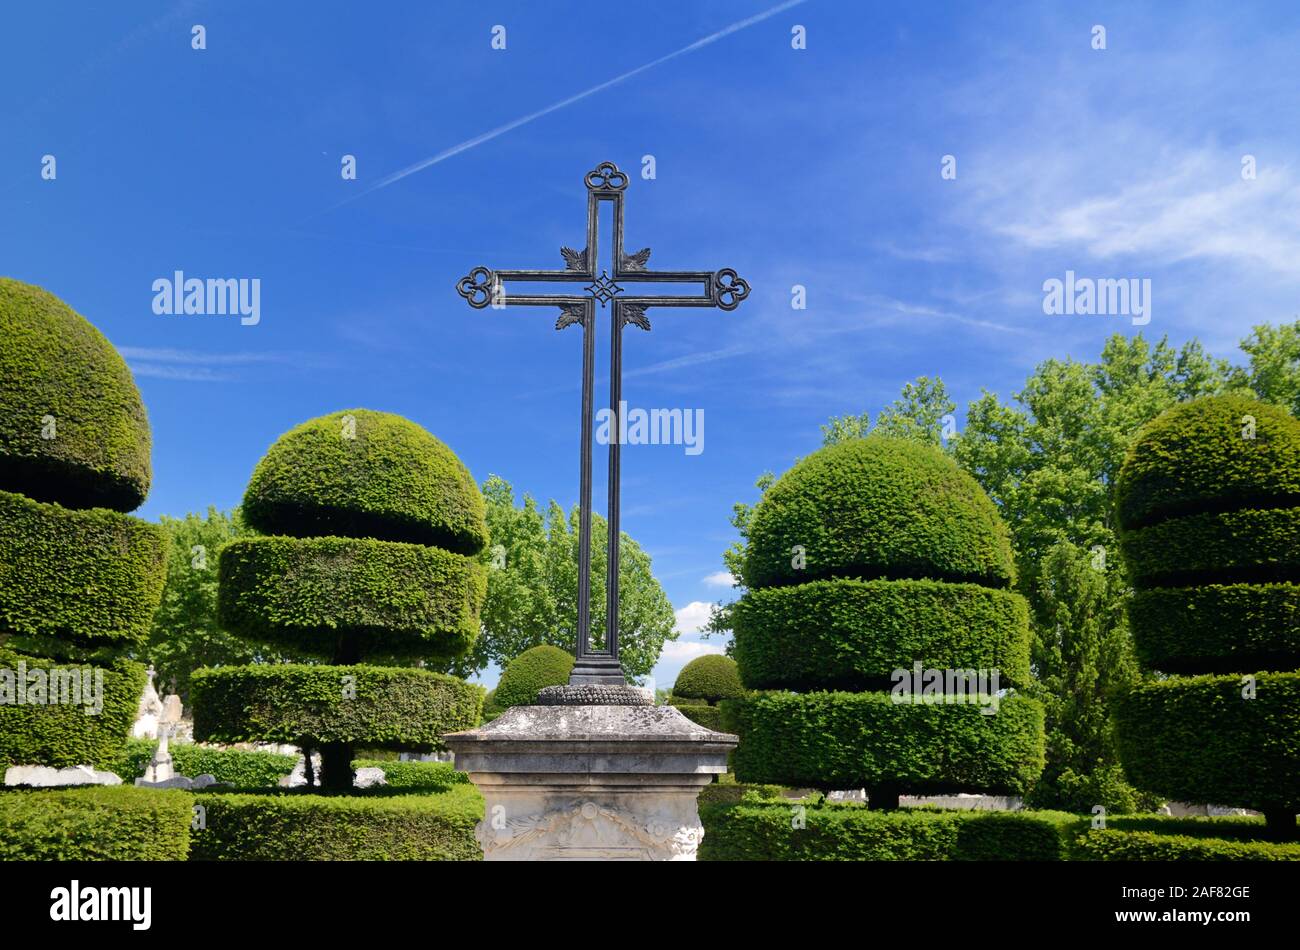 Topiary or Clipped Yew Tree Hedges, Taxus baccata, in Geometric Shapes in Cemetery at Eyguières in the Alpilles Regional Park Provence France Stock Photo